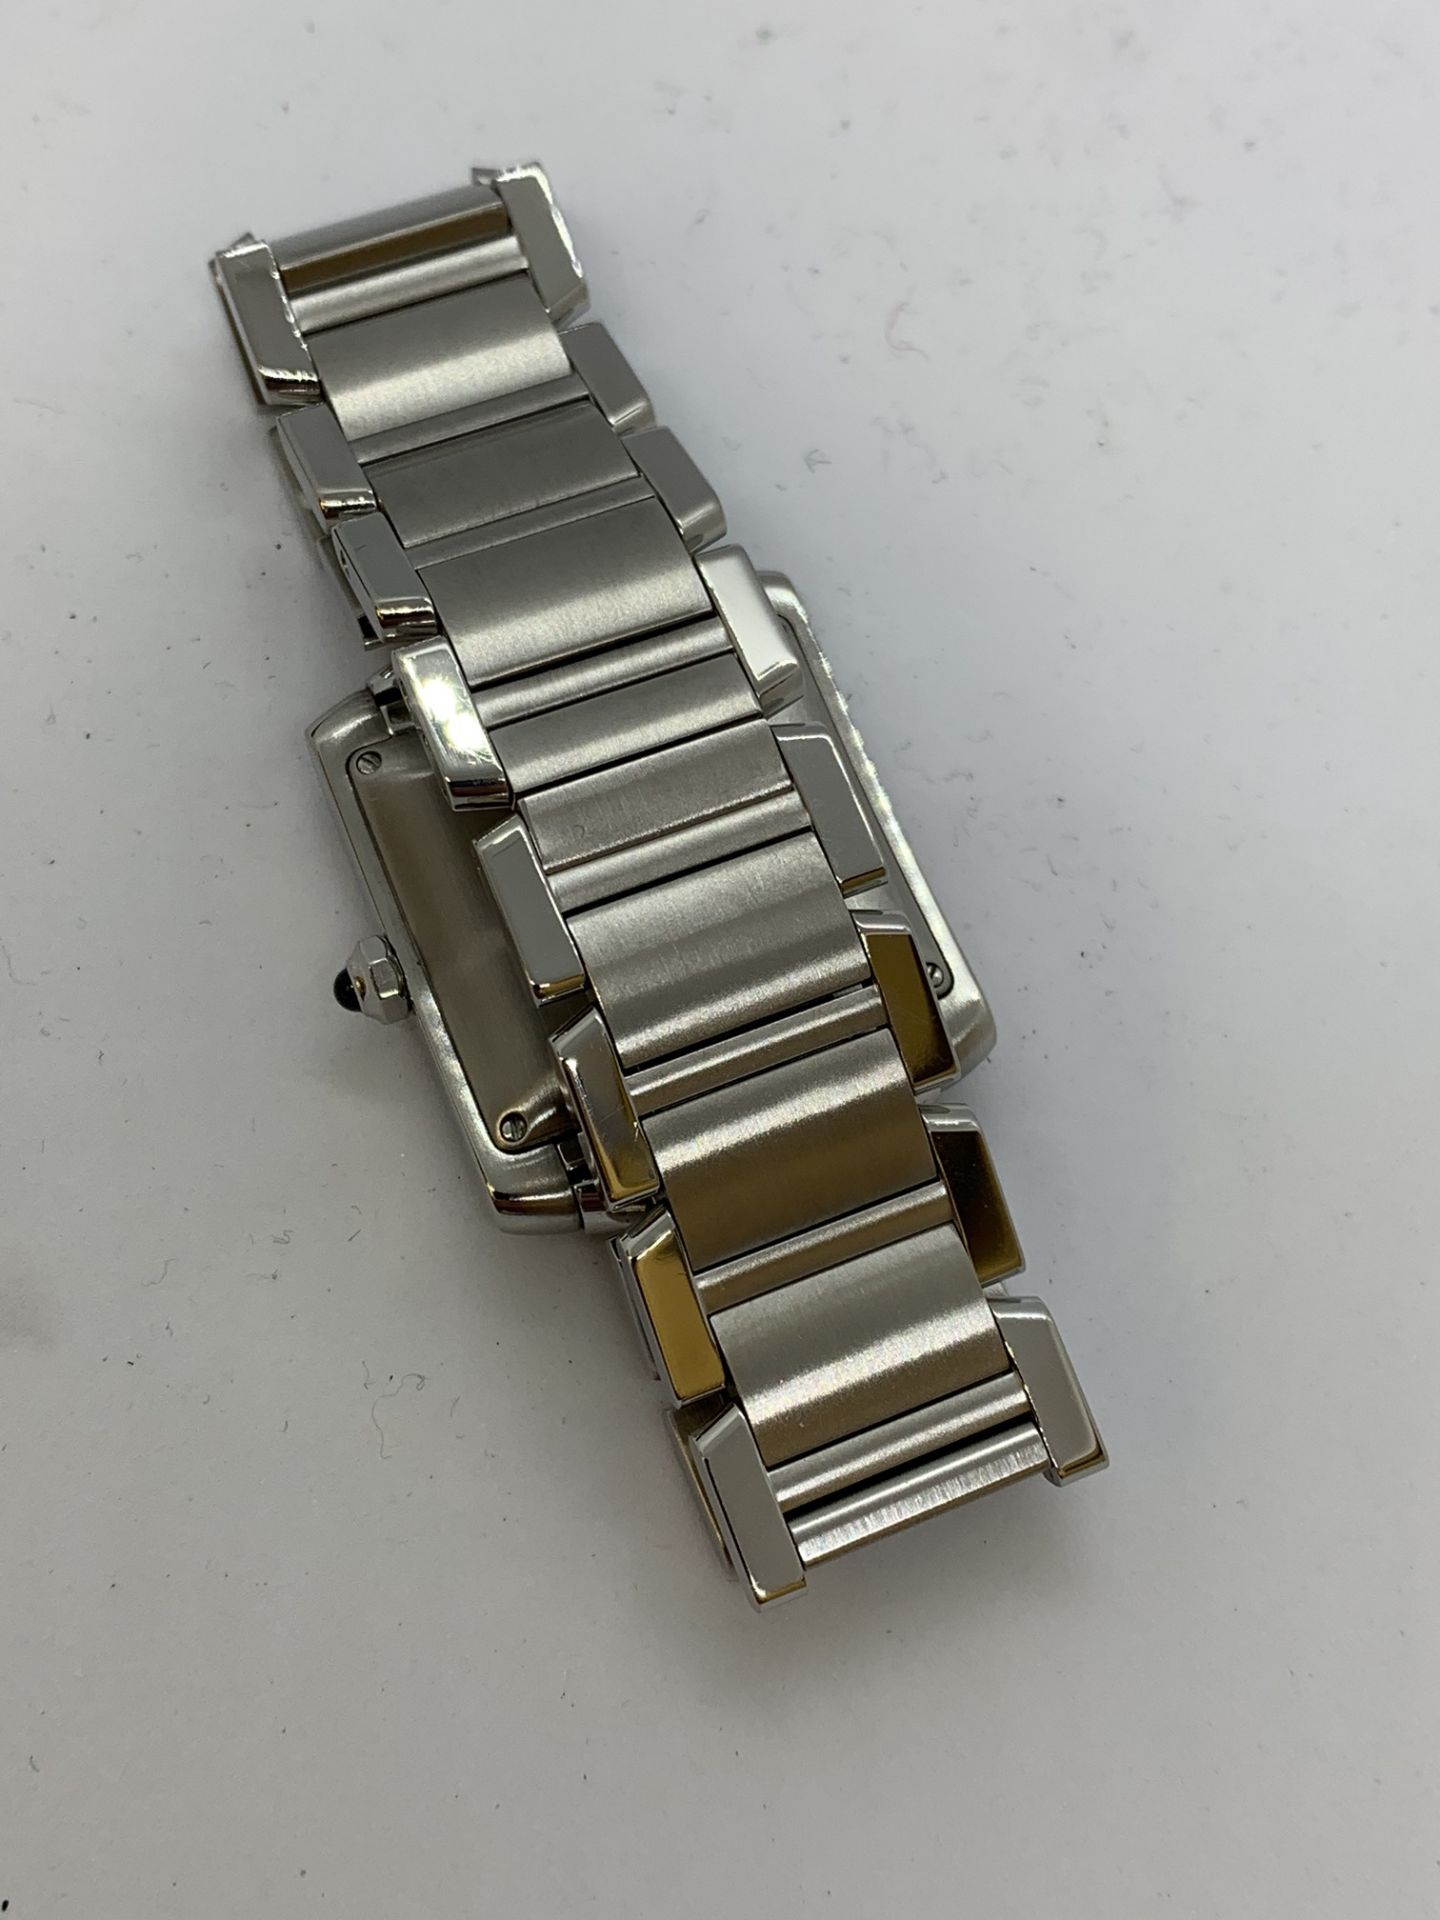 CARTIER GENTS TANK AUTOMATIC WATCH - Image 3 of 7